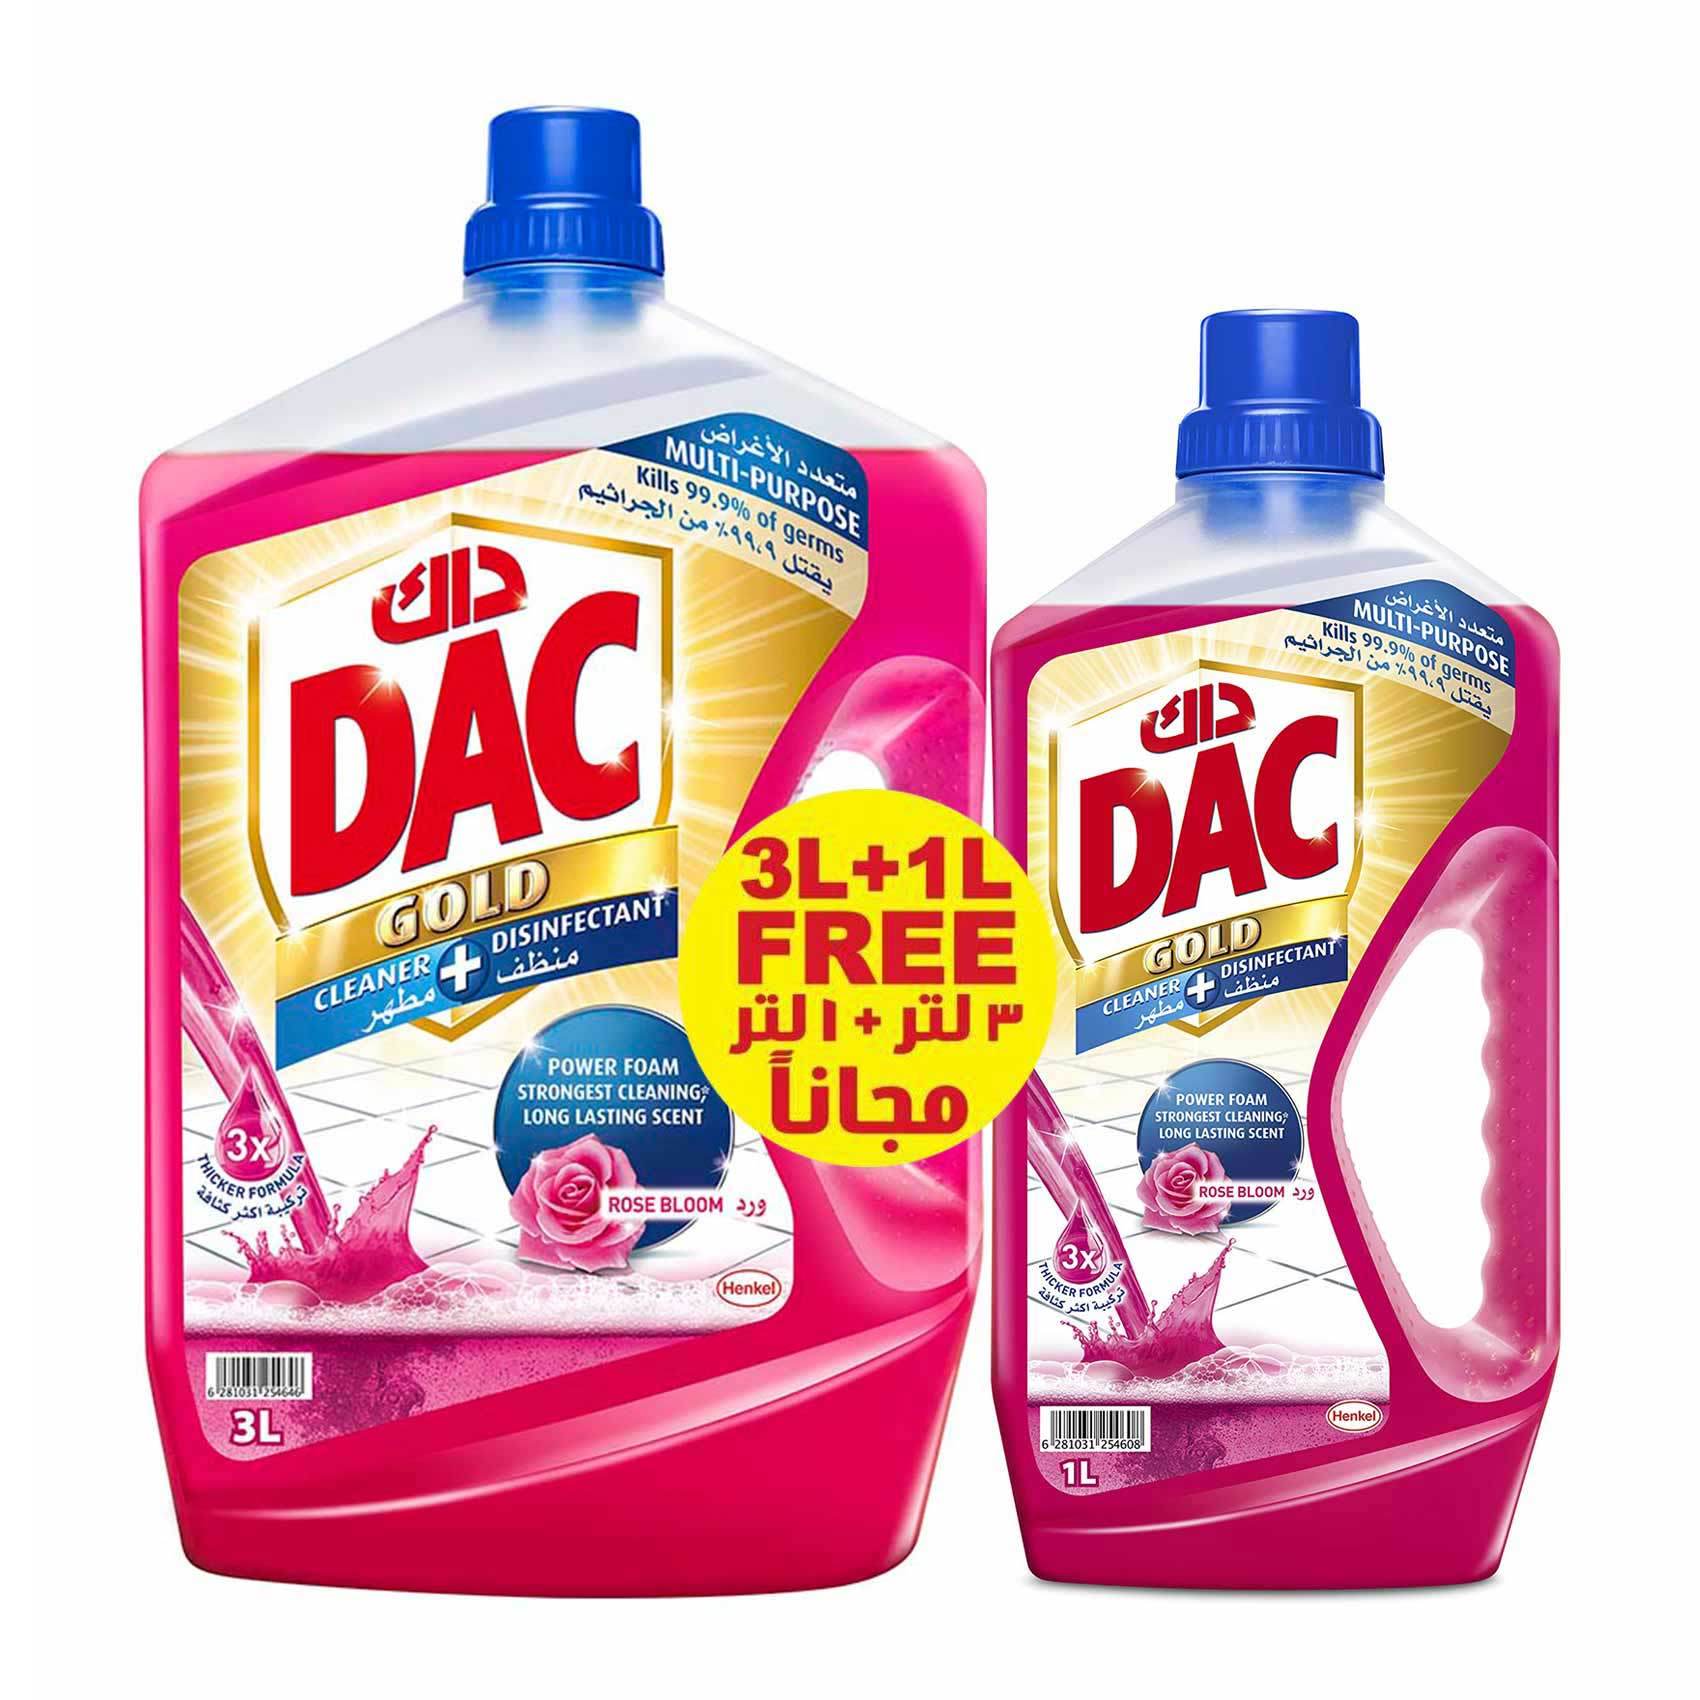 buy dac gold rose 3 l 1 l free online shop cleaning household on carrefour saudi arabia